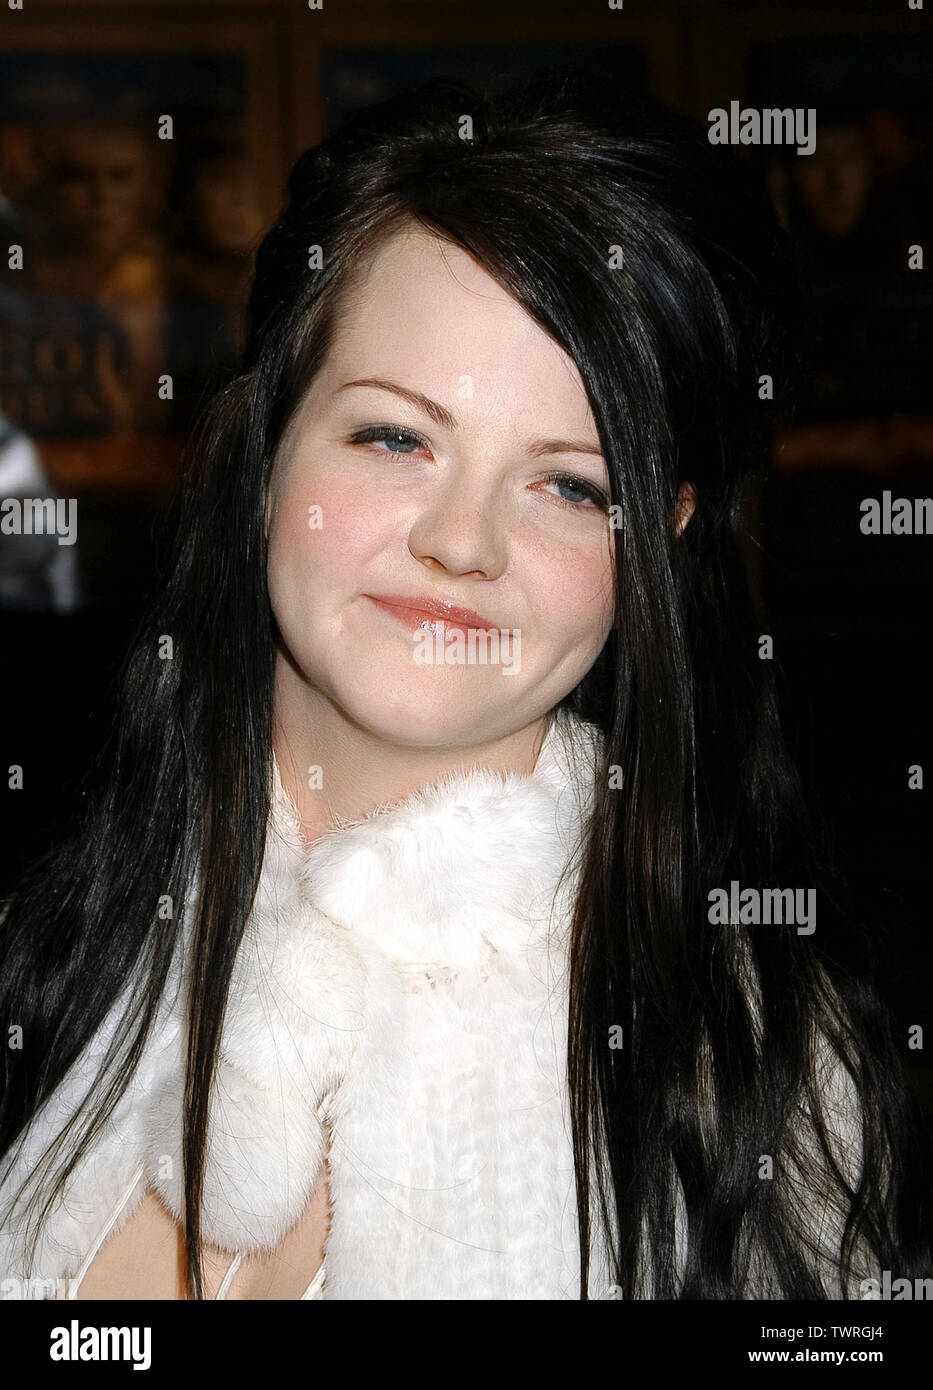 Meg White at the Premiere of 'Cold Mountain' at the Mann's National Theater in Hollywood, CA. The event took place on Sunday, December 7, 2003.  Photo credit: SBM / PictureLux File Reference # 33790-2986SMBPLX  For Editorial Use Only -  All Rights Reserved Stock Photo